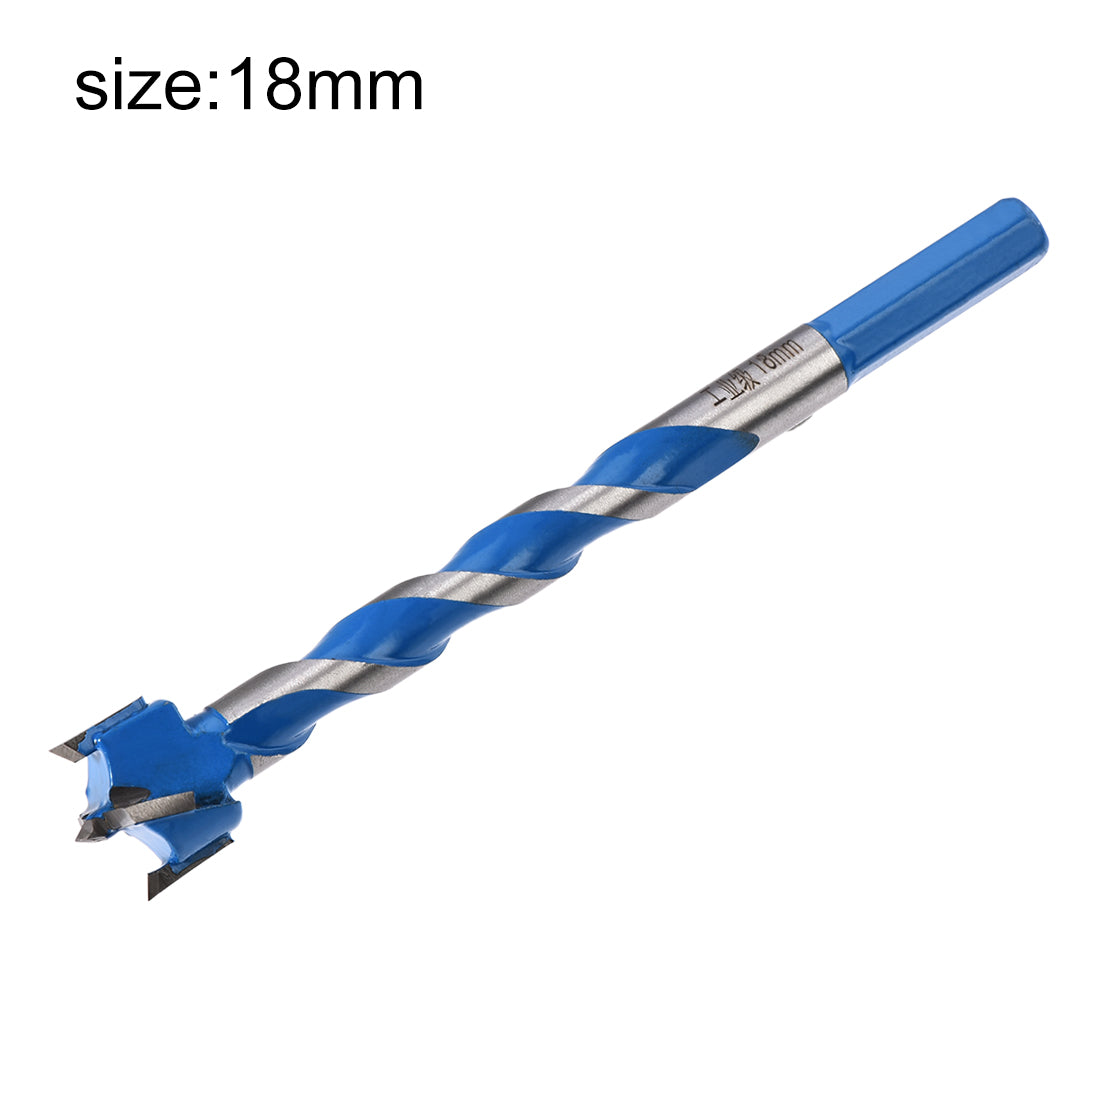 uxcell Uxcell Forstner Wood Boring Drill Bit 18mm Dia. Hole Saw Carbide Alloy Steel Tip Hex Shank Cutting for Hinge Plywood Wood Tool Blue